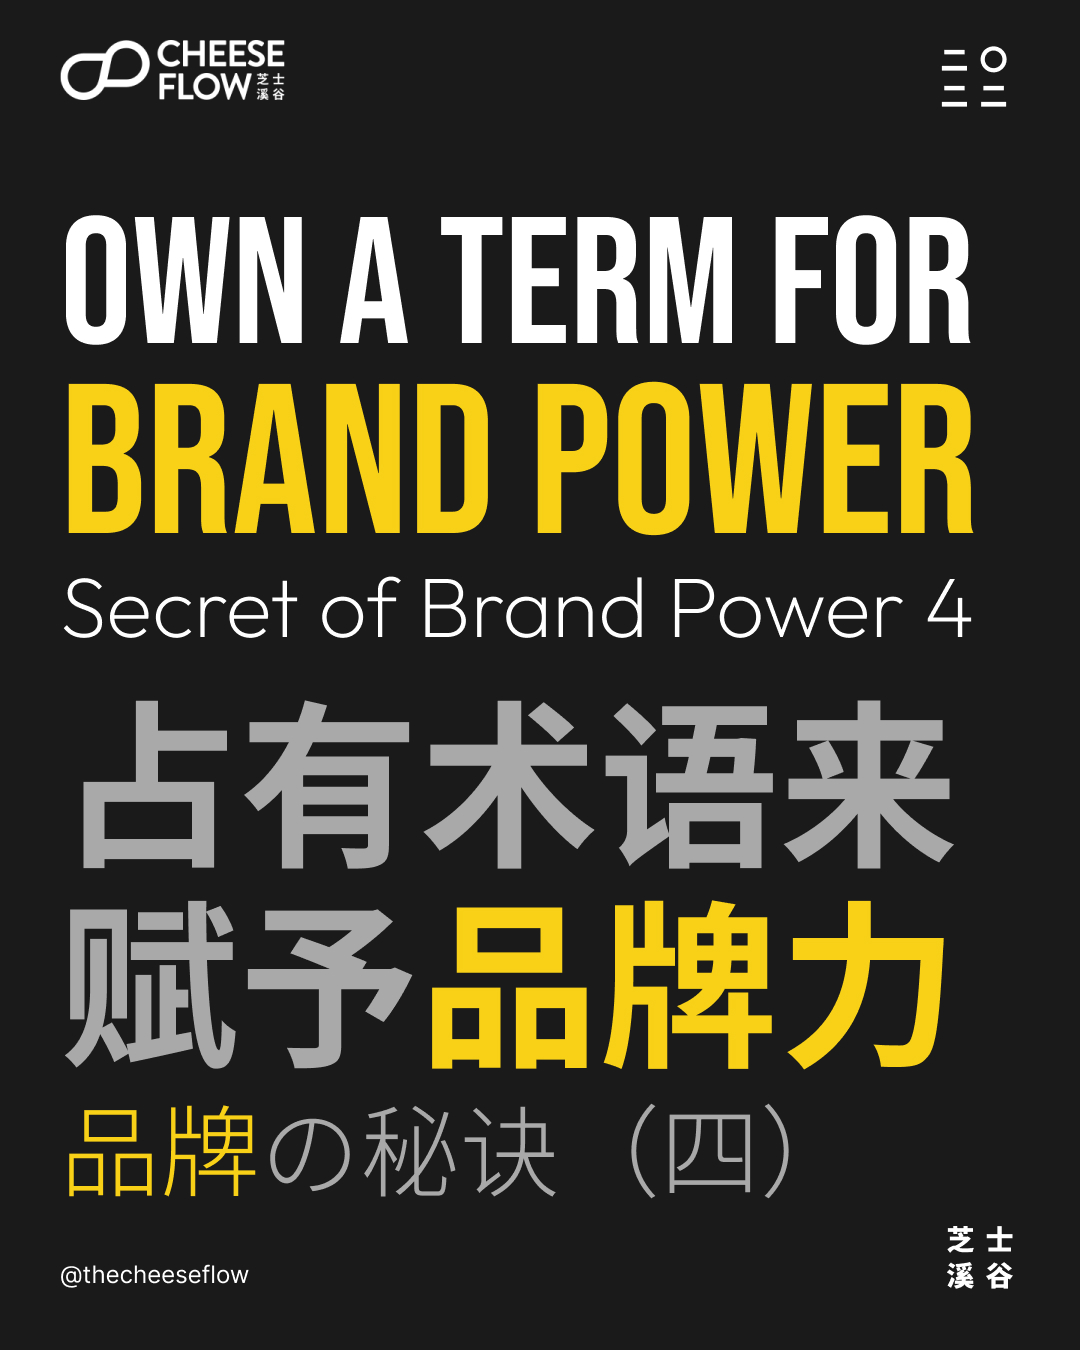 Brand owning a term increases brand power